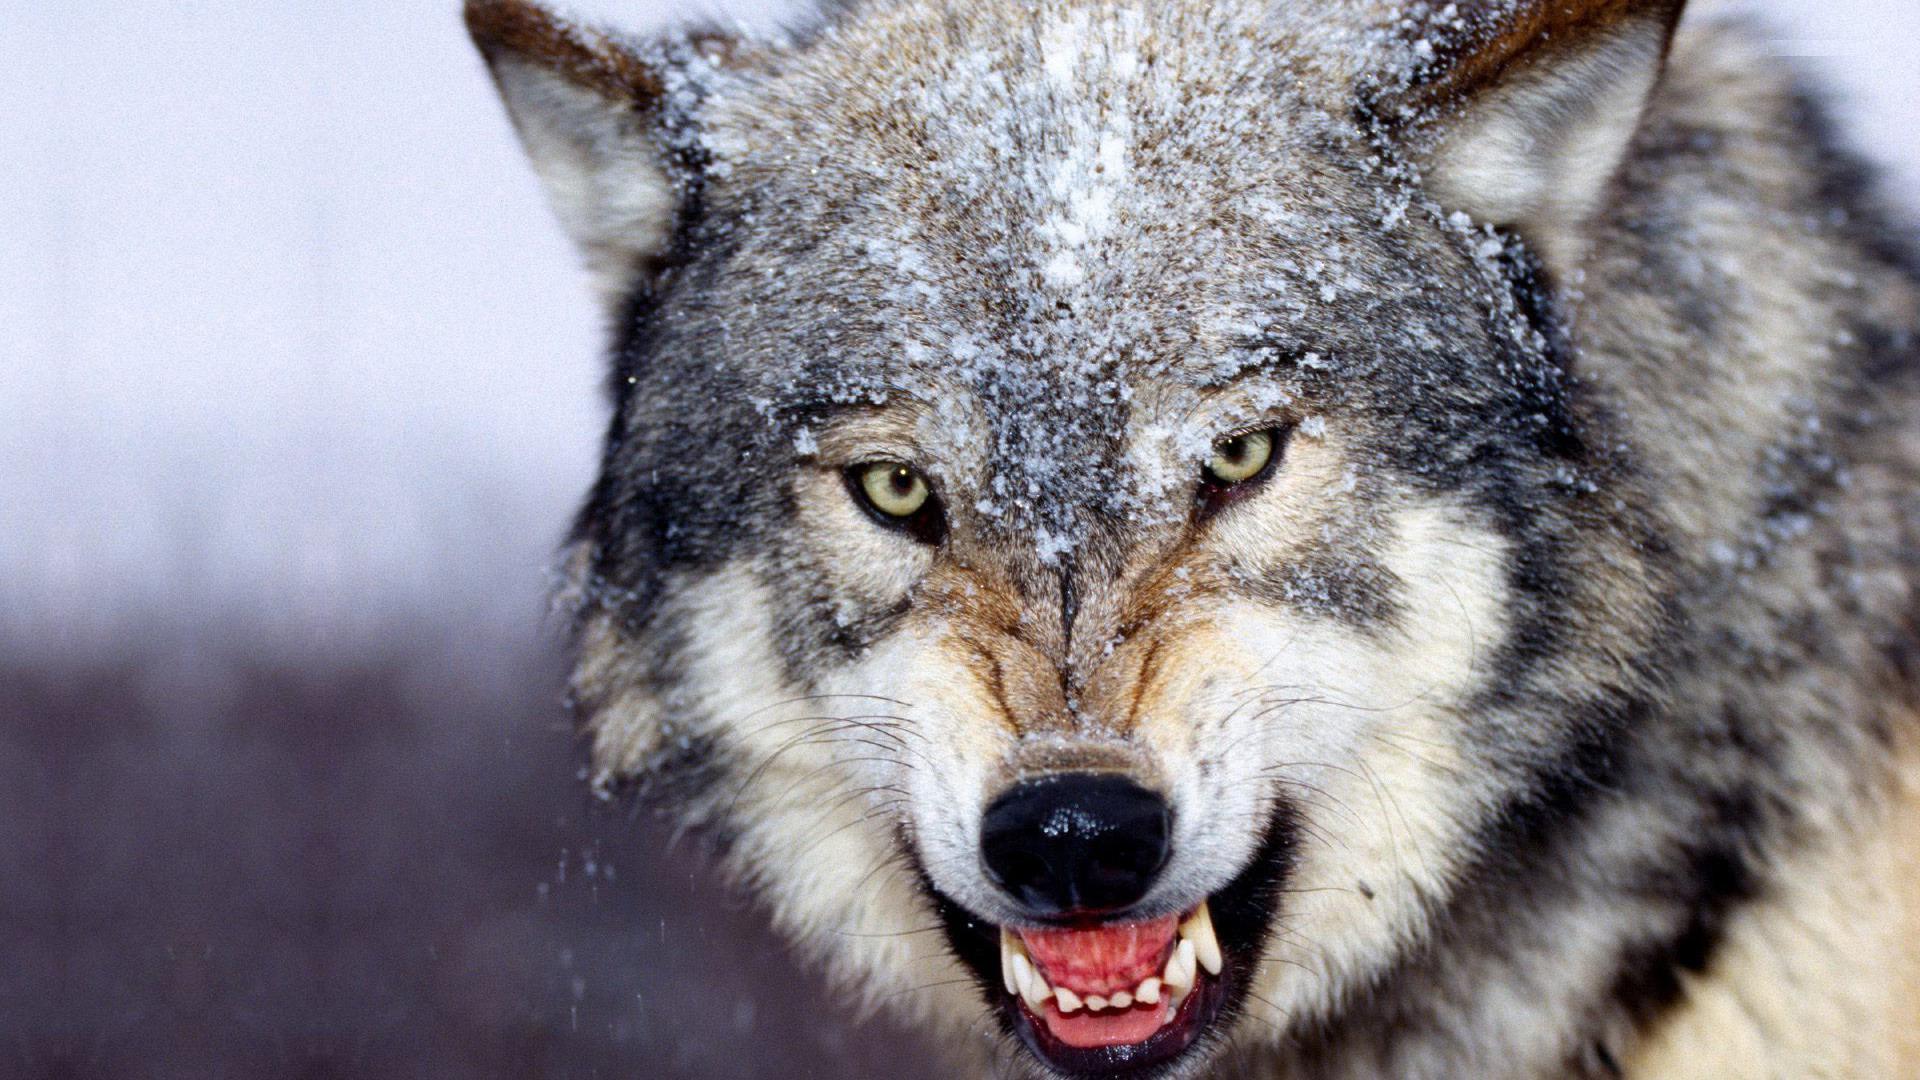 Wolf HD Wallpaper. Wolves Desktop Wallpaper For Android. Cool